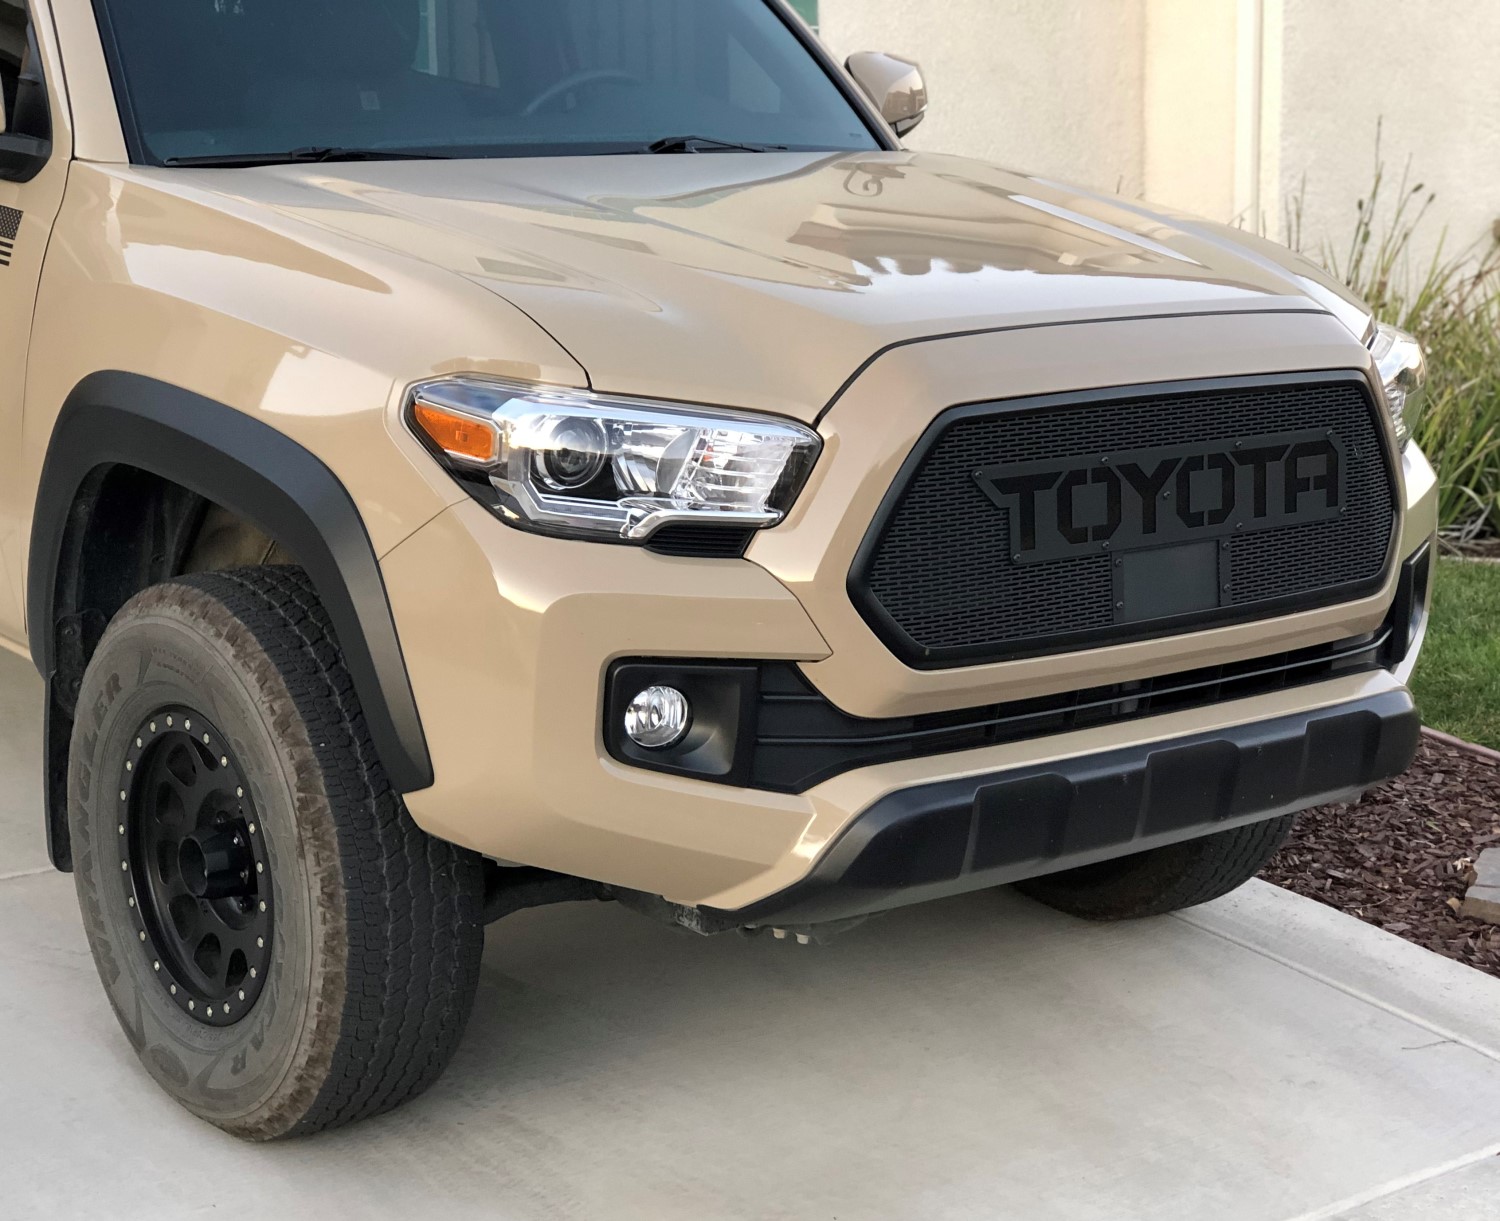 Black is Back: Quicksand Tacoma's Custom Grille in Gloss and Flat Black